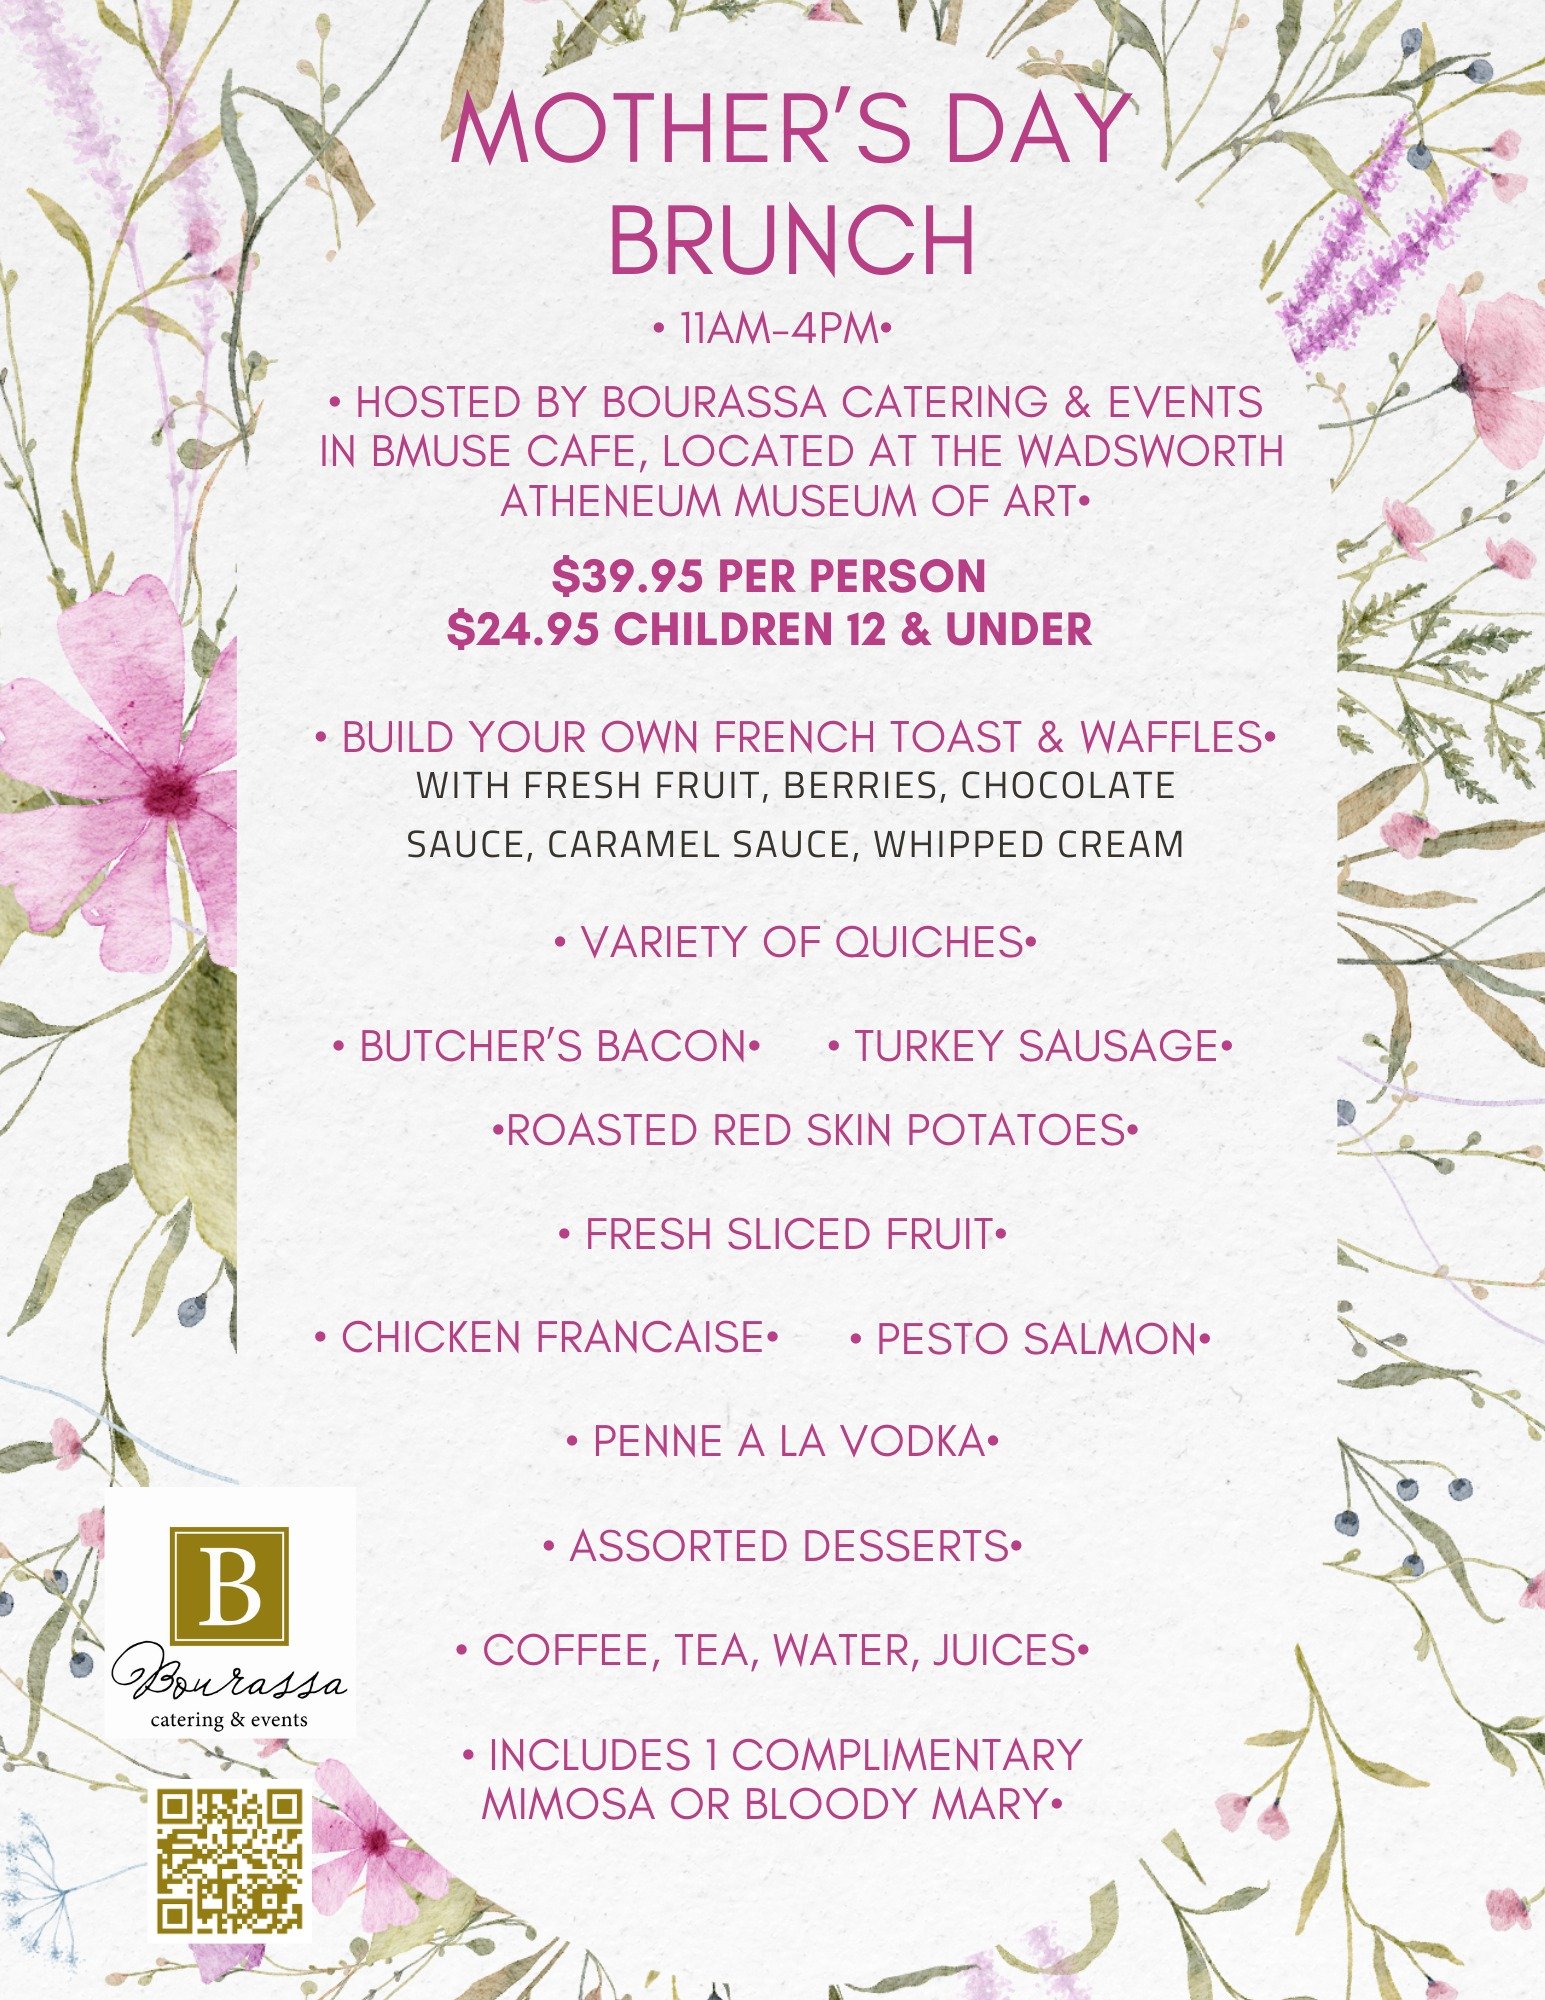 Come celebrate MOM!  Sunday from 11-4 at @bmusecafe.hartford located in the @thewadsworth for a Mother's Day brunch buffet. Menu and pricing below.

And don't forget to grab tickets to join the @hgmcsing for their spring show!

#cheflife #foodie #bou